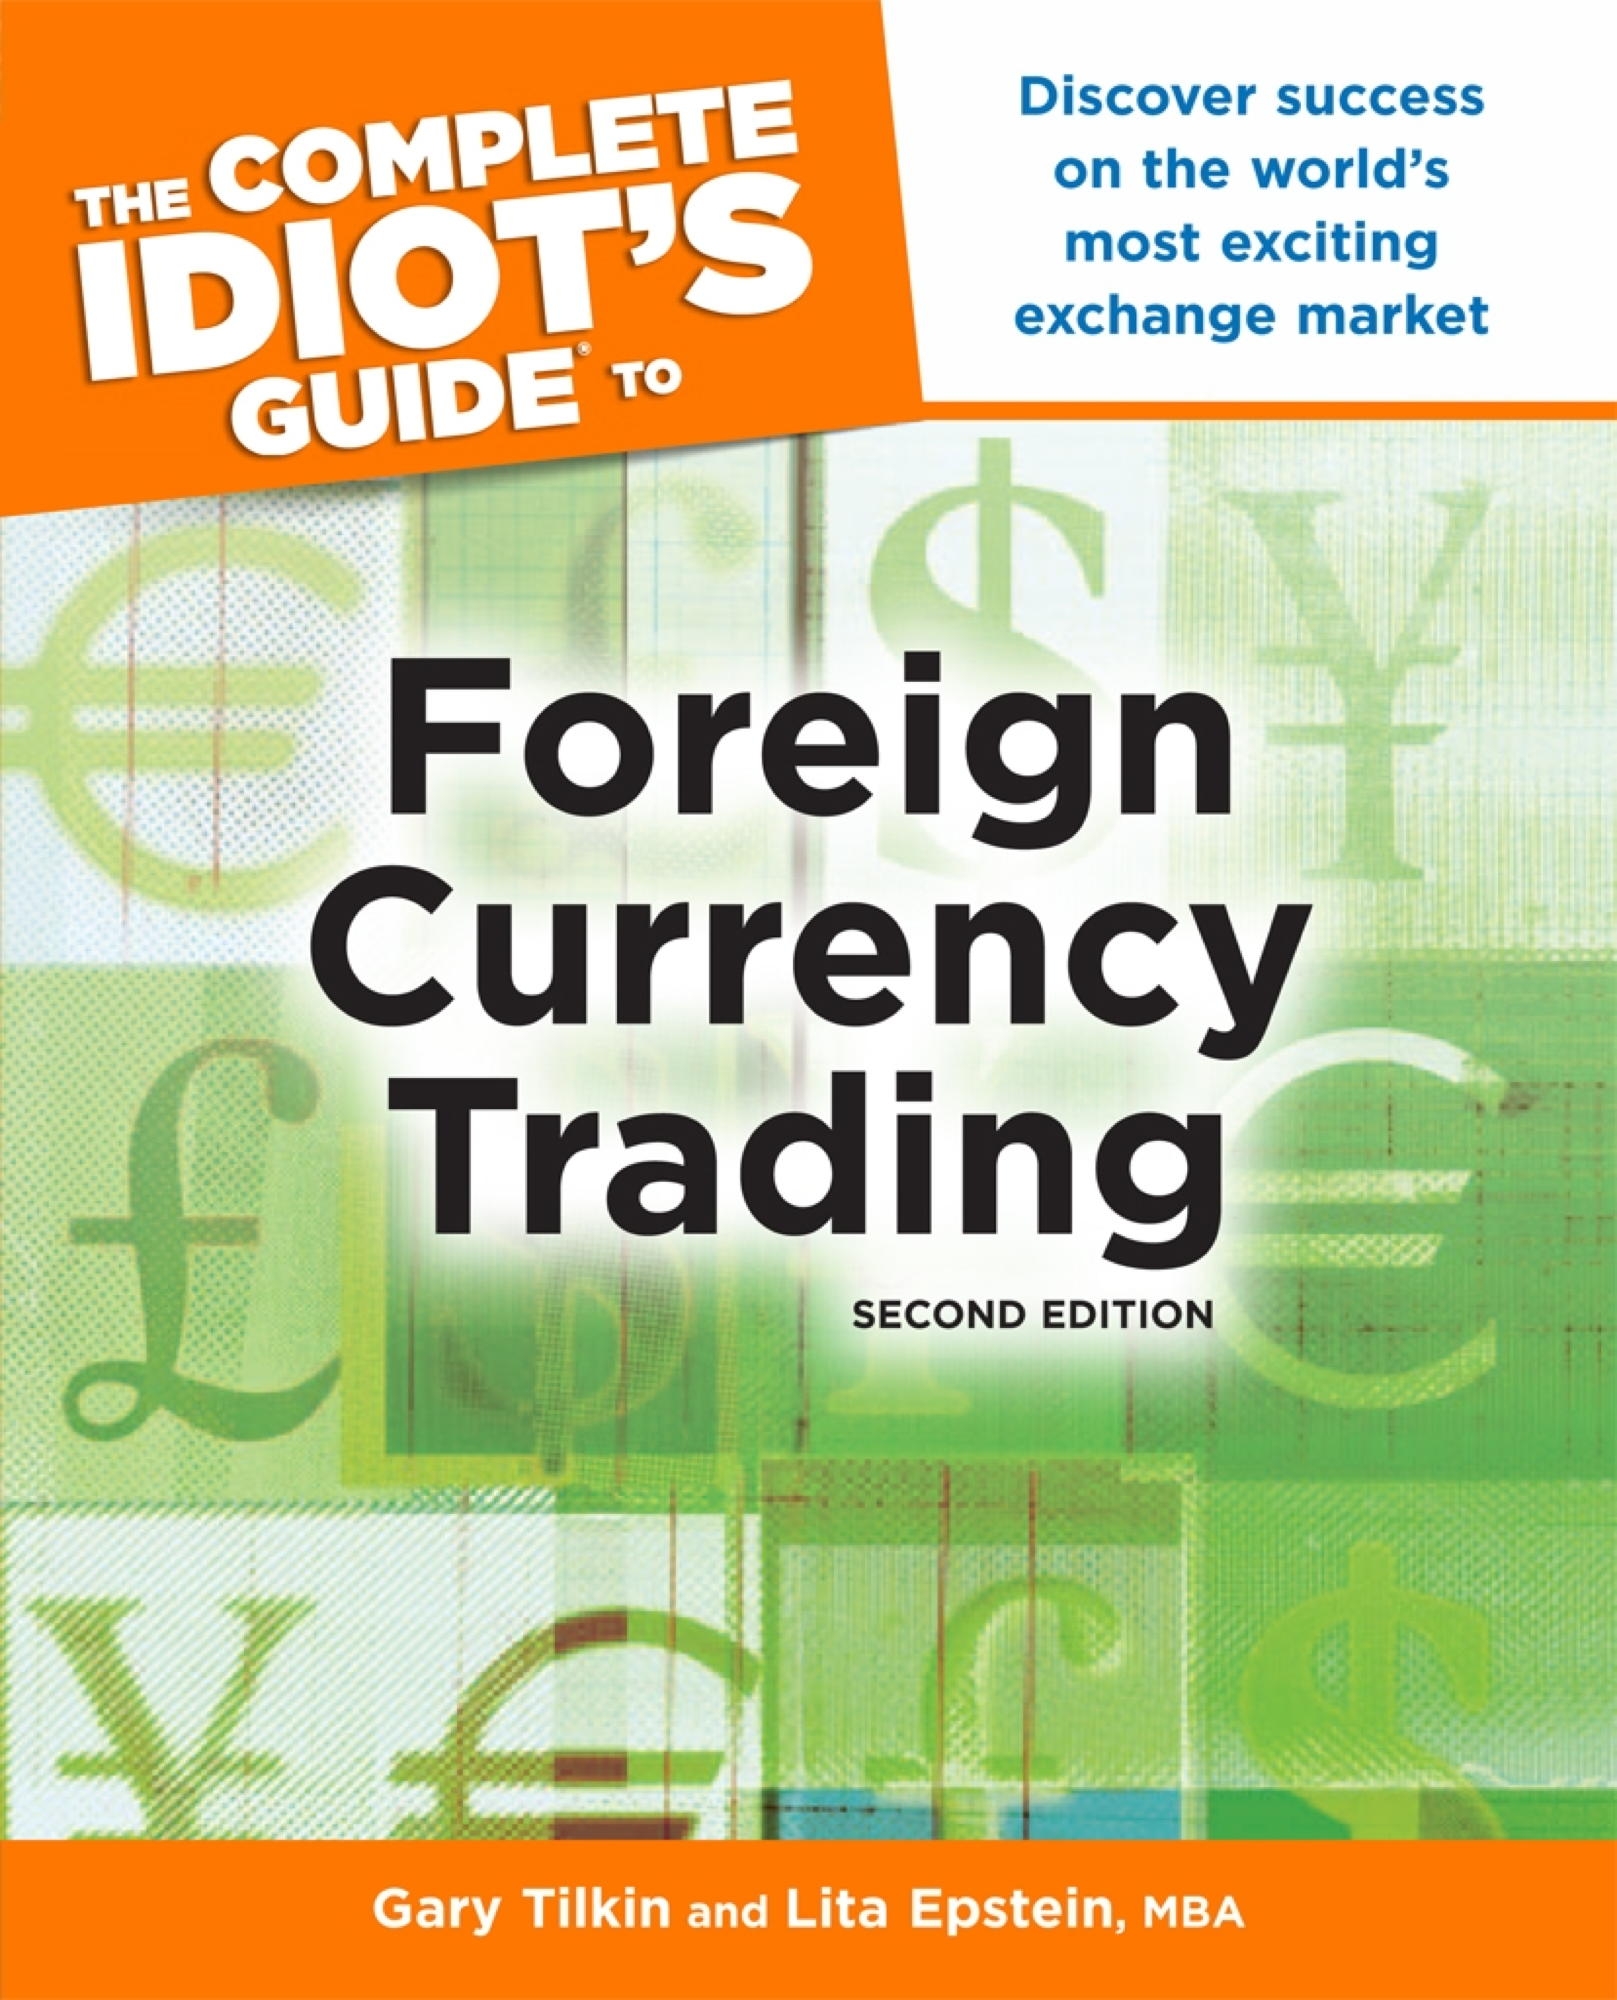 The Complete Idiot's Guide to Foreign Currency Trading, 2nd Edition